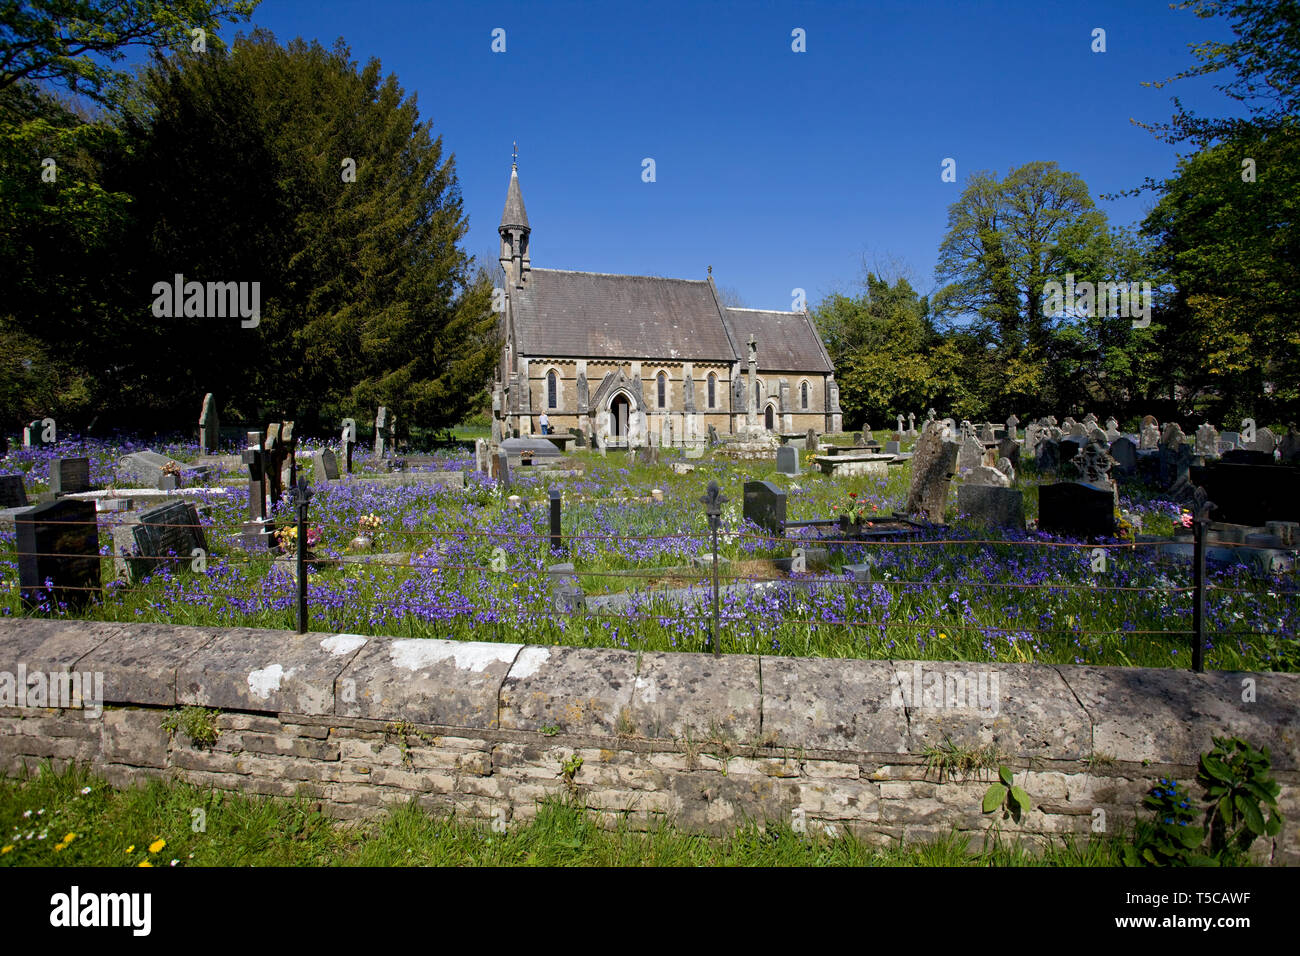 St Teilo's Church at Merhyr Mawr. South Wales.UK Stock Photo